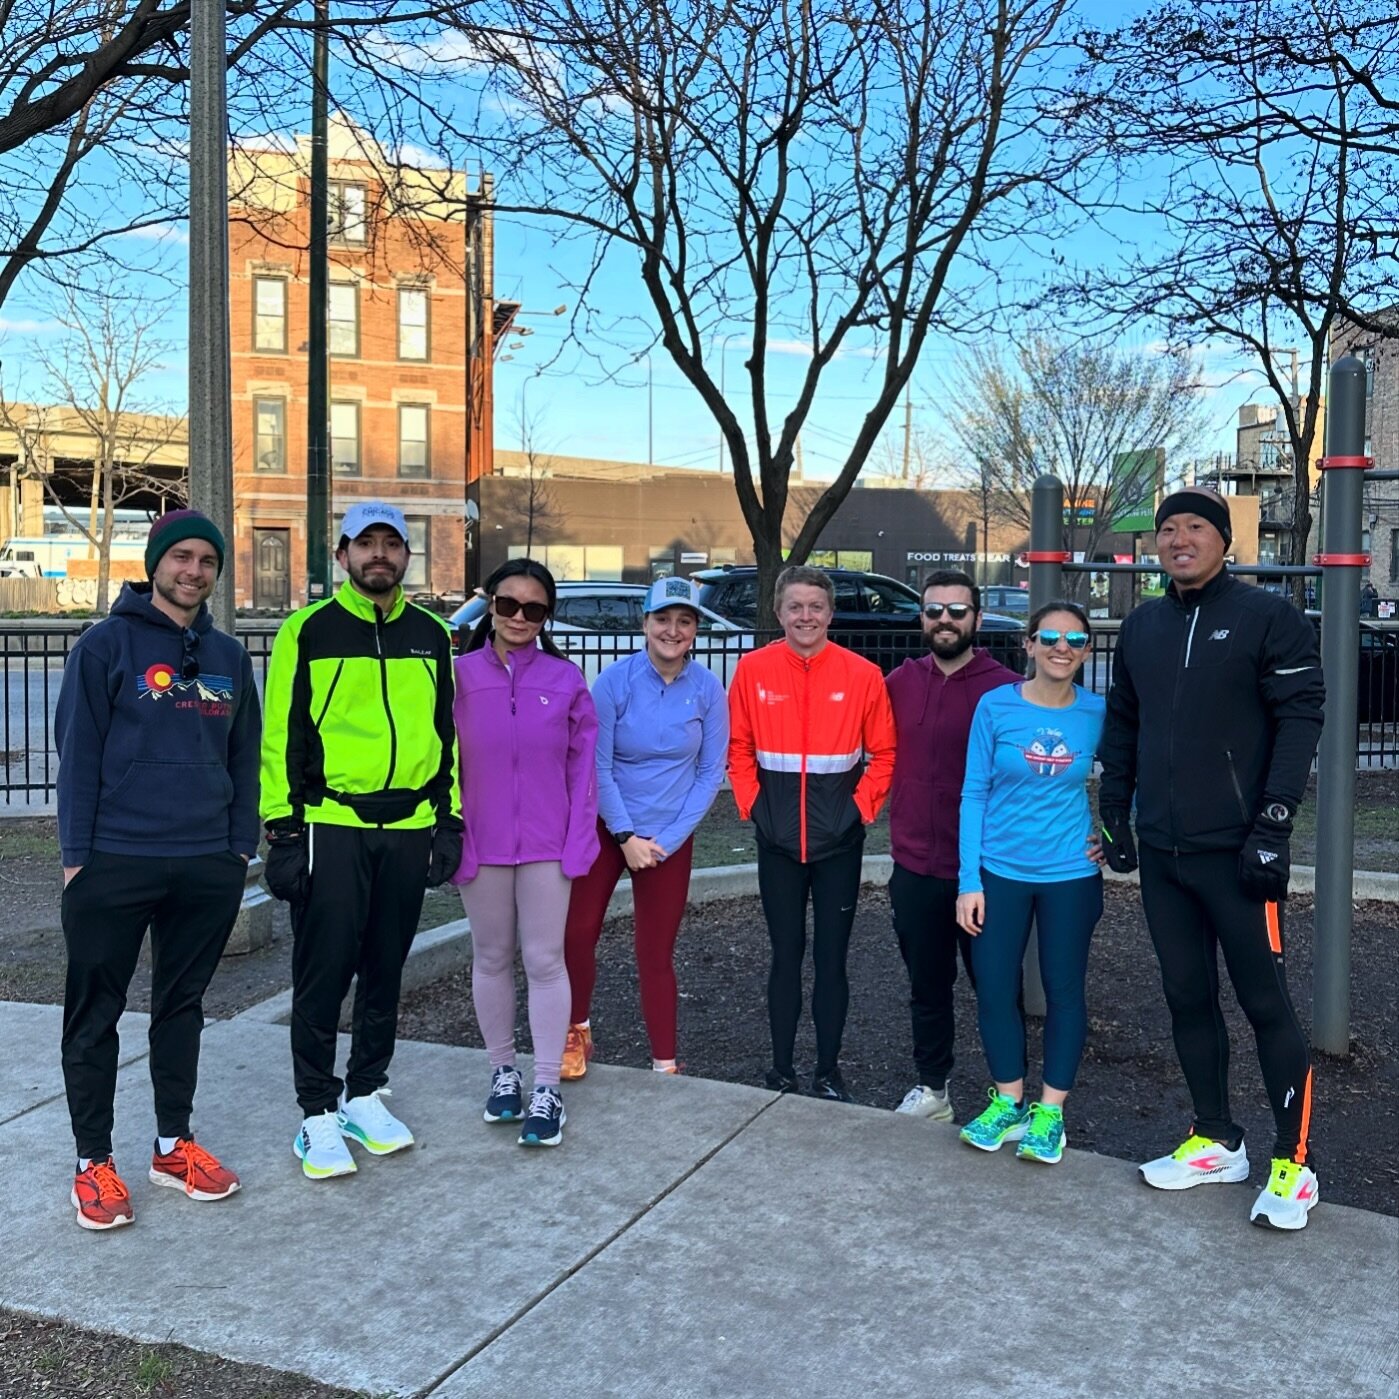 Fresh shoes &amp; shamrock survivors 💪 

Forever Pace Run Club every Wednesday at 6pm.

#foreverpace #foreverpacerunclub #chicagorunclub #runclub #runningcommunity #chicagosports #chicagoclubs #chicagorunner #chicagorunners